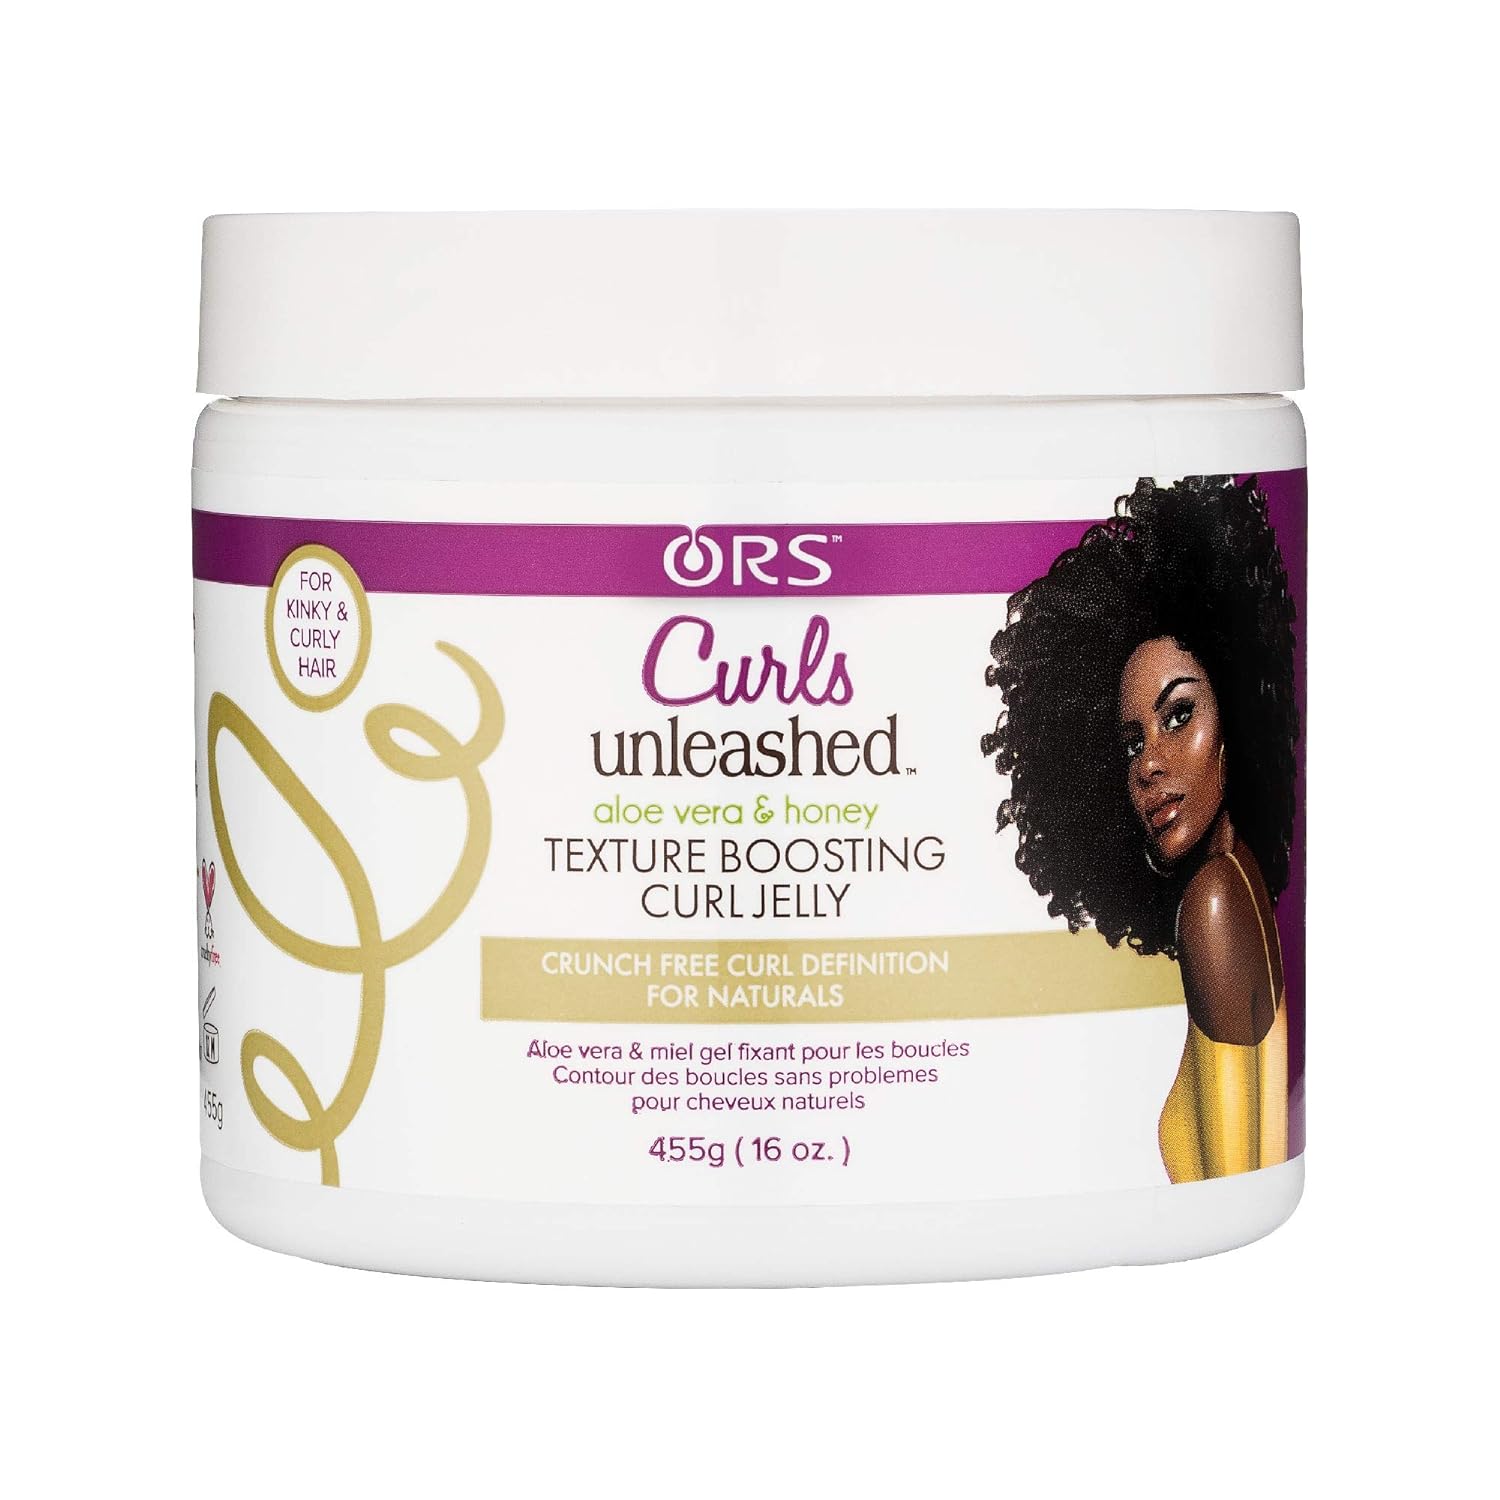 ORS CURLS UNLEASHED TEXTURE BOOSTING JELLY 16oz